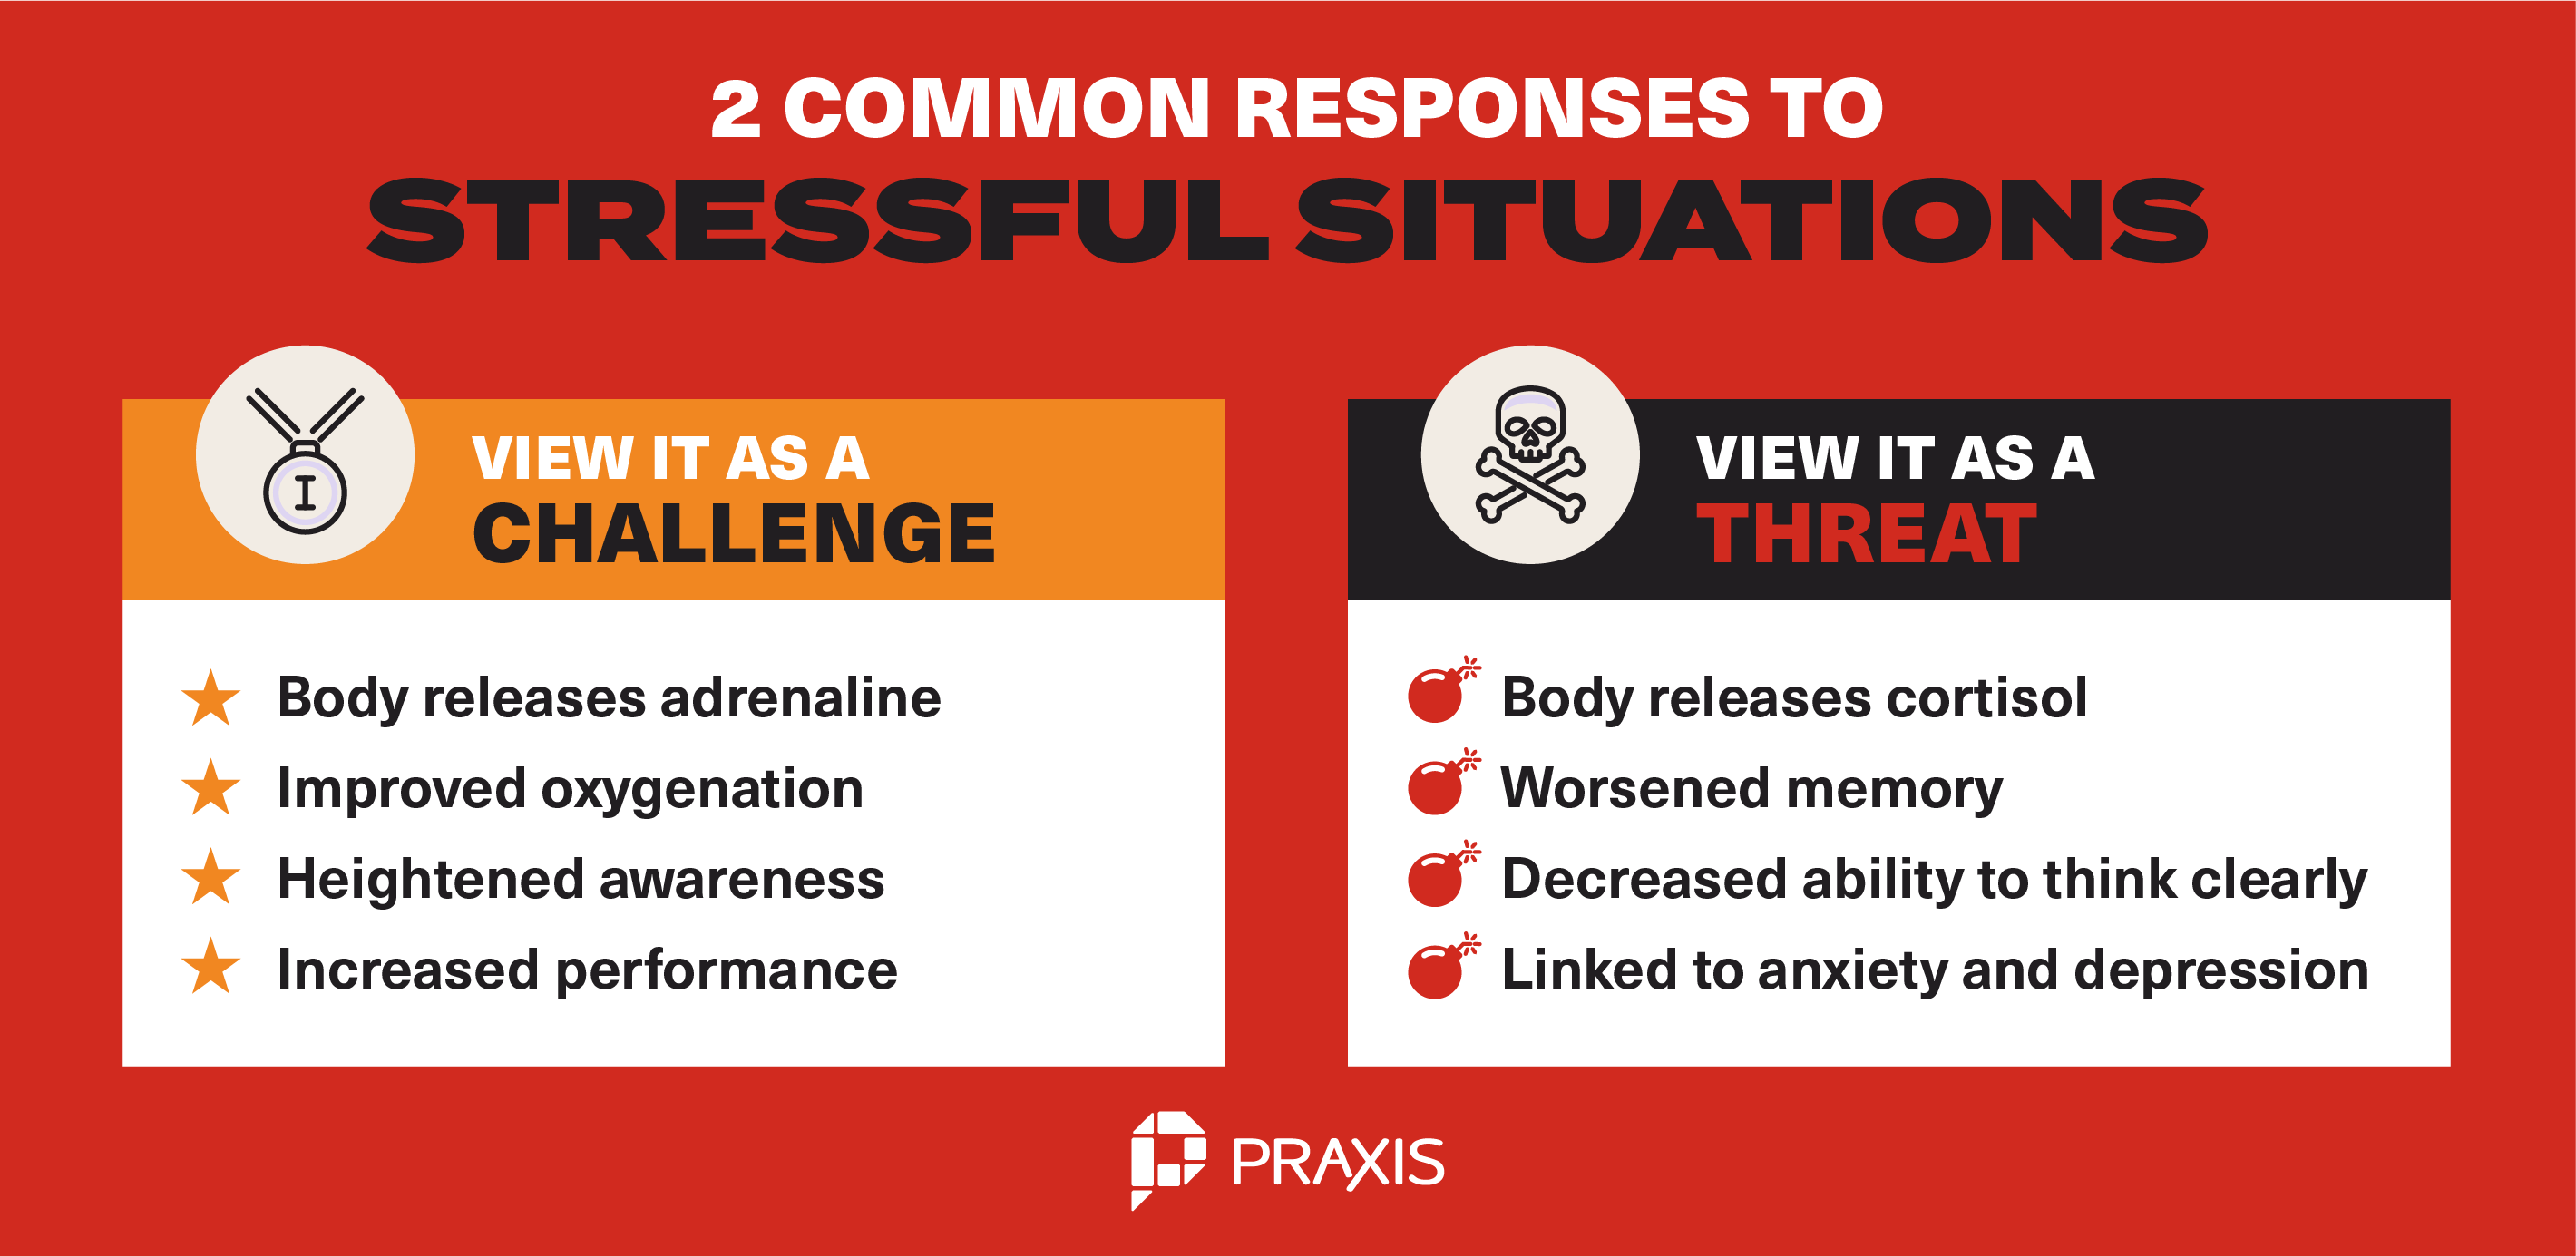 responses to stressful situations